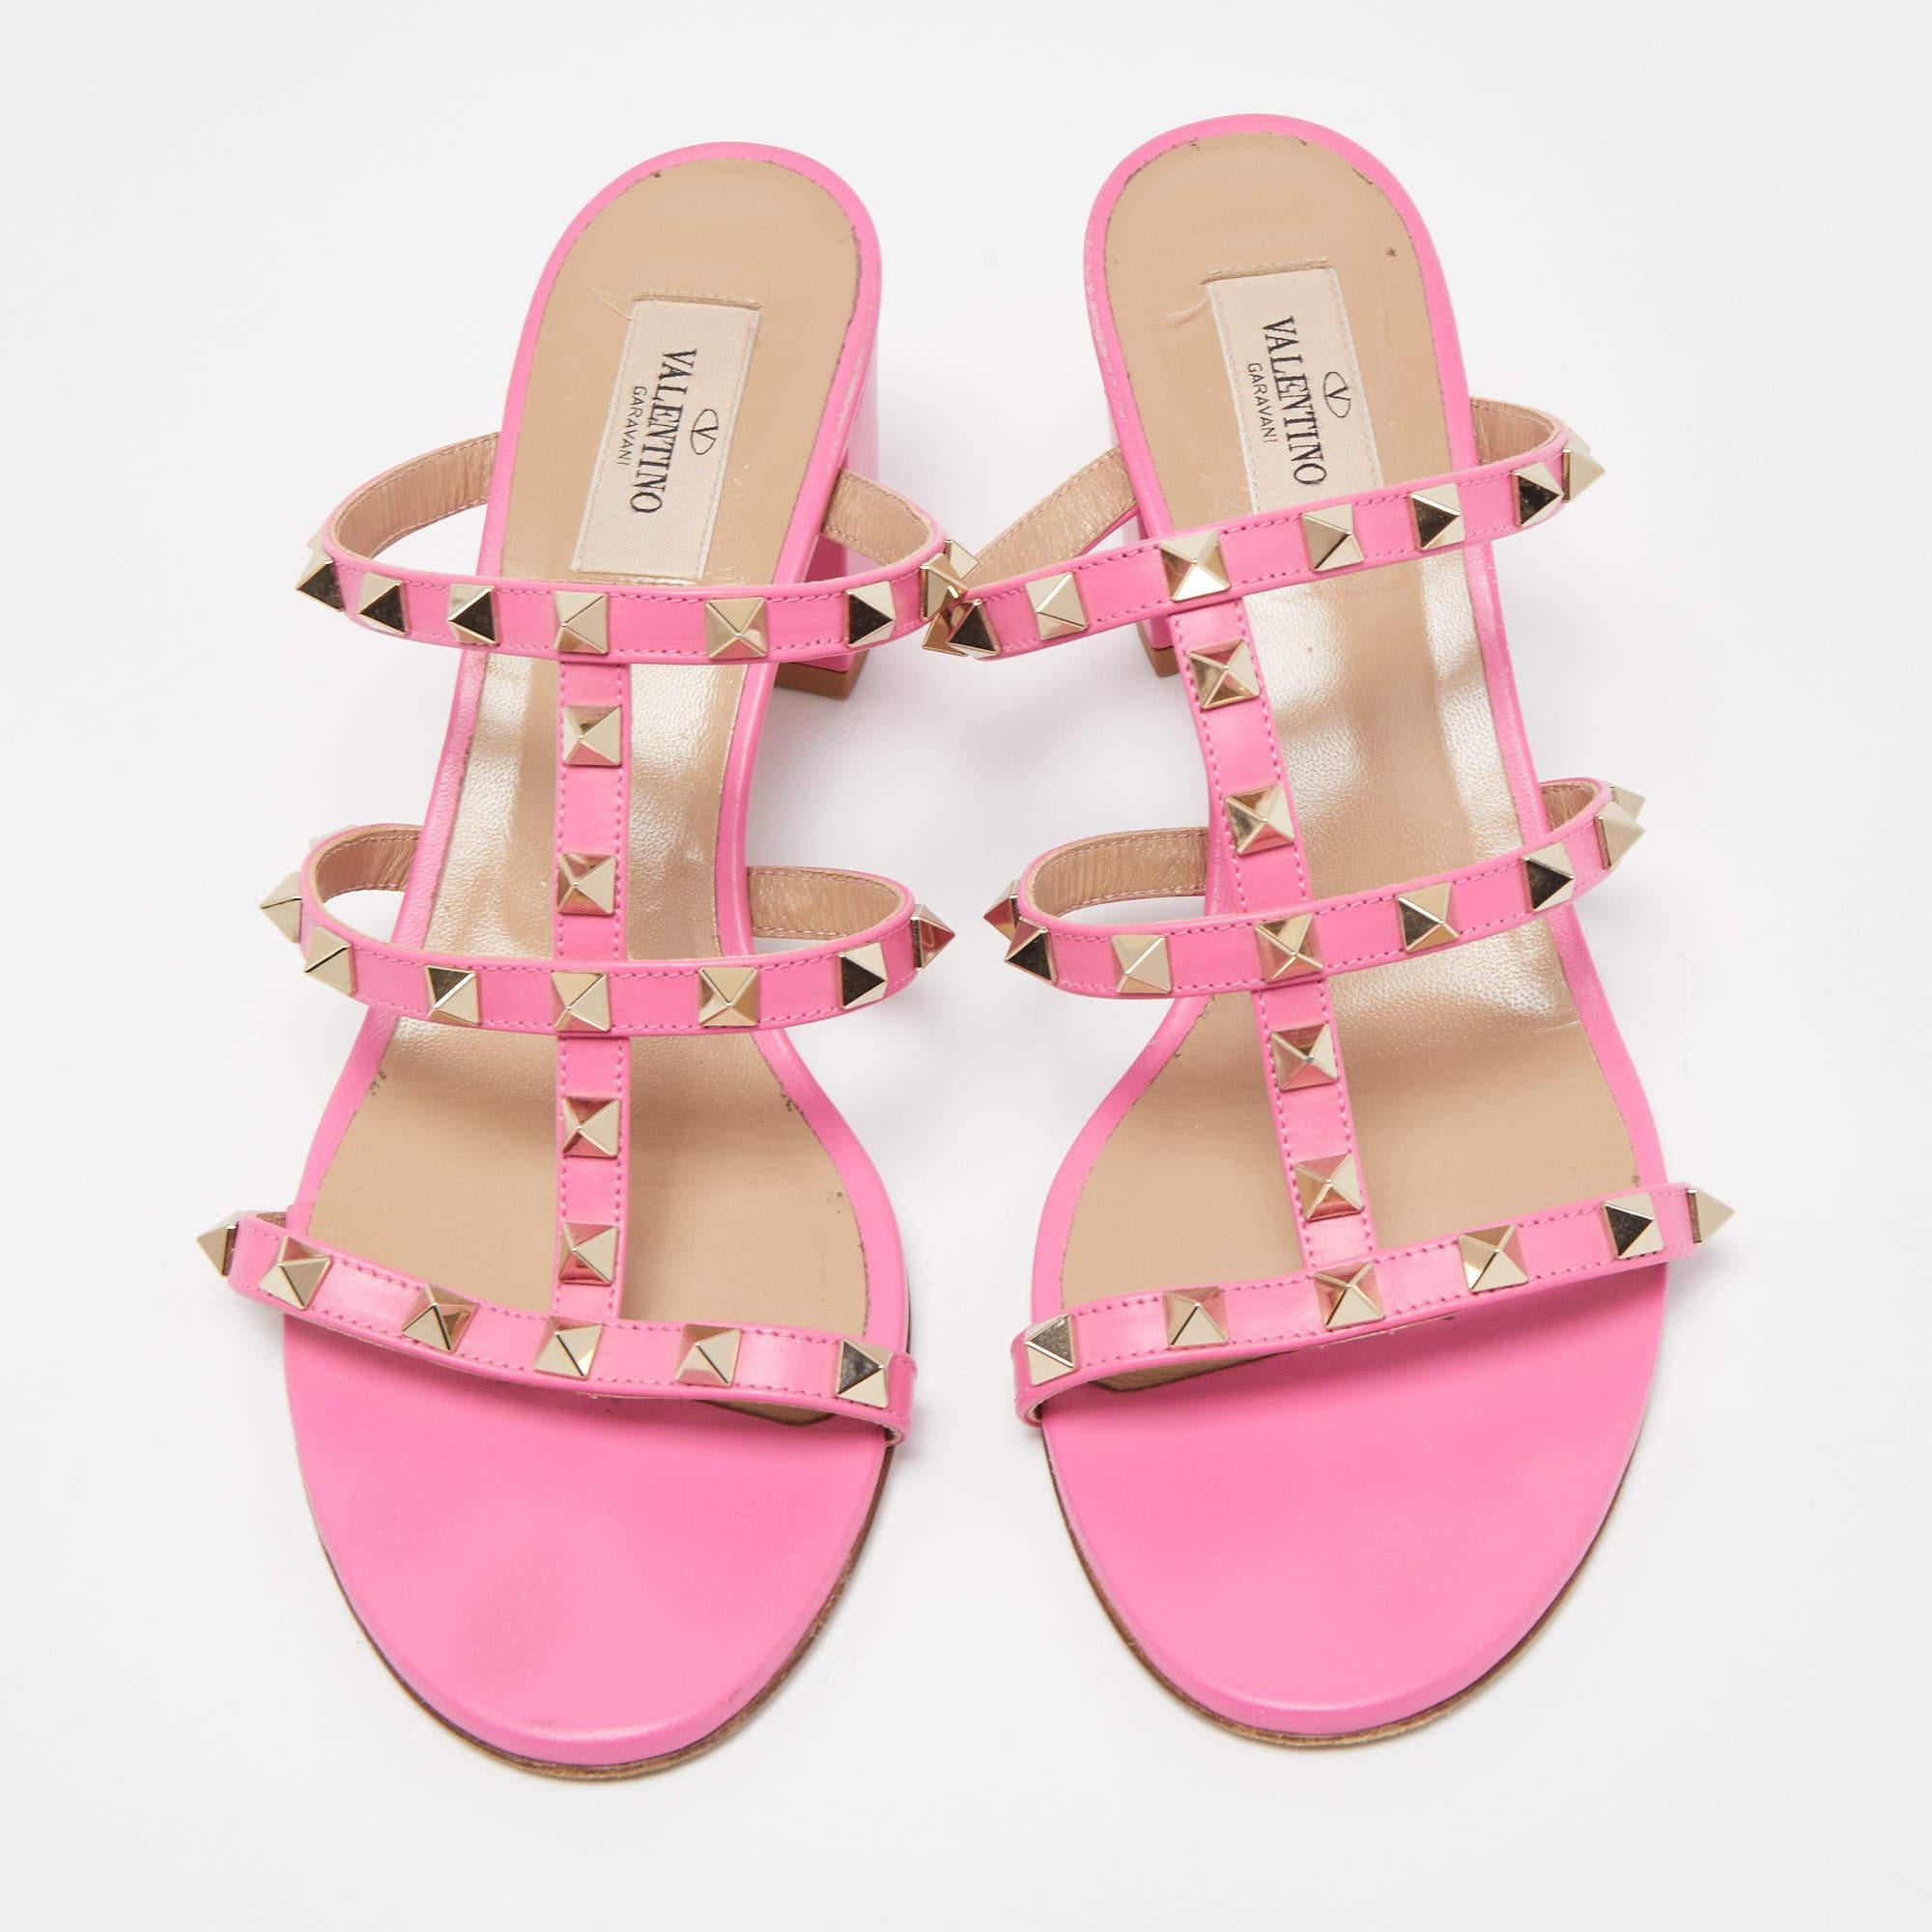 These sandals are chic and contemporary. Crafted from premium materials, these shoes will luxuriously frame your feet and will fill your day with bold steps.

